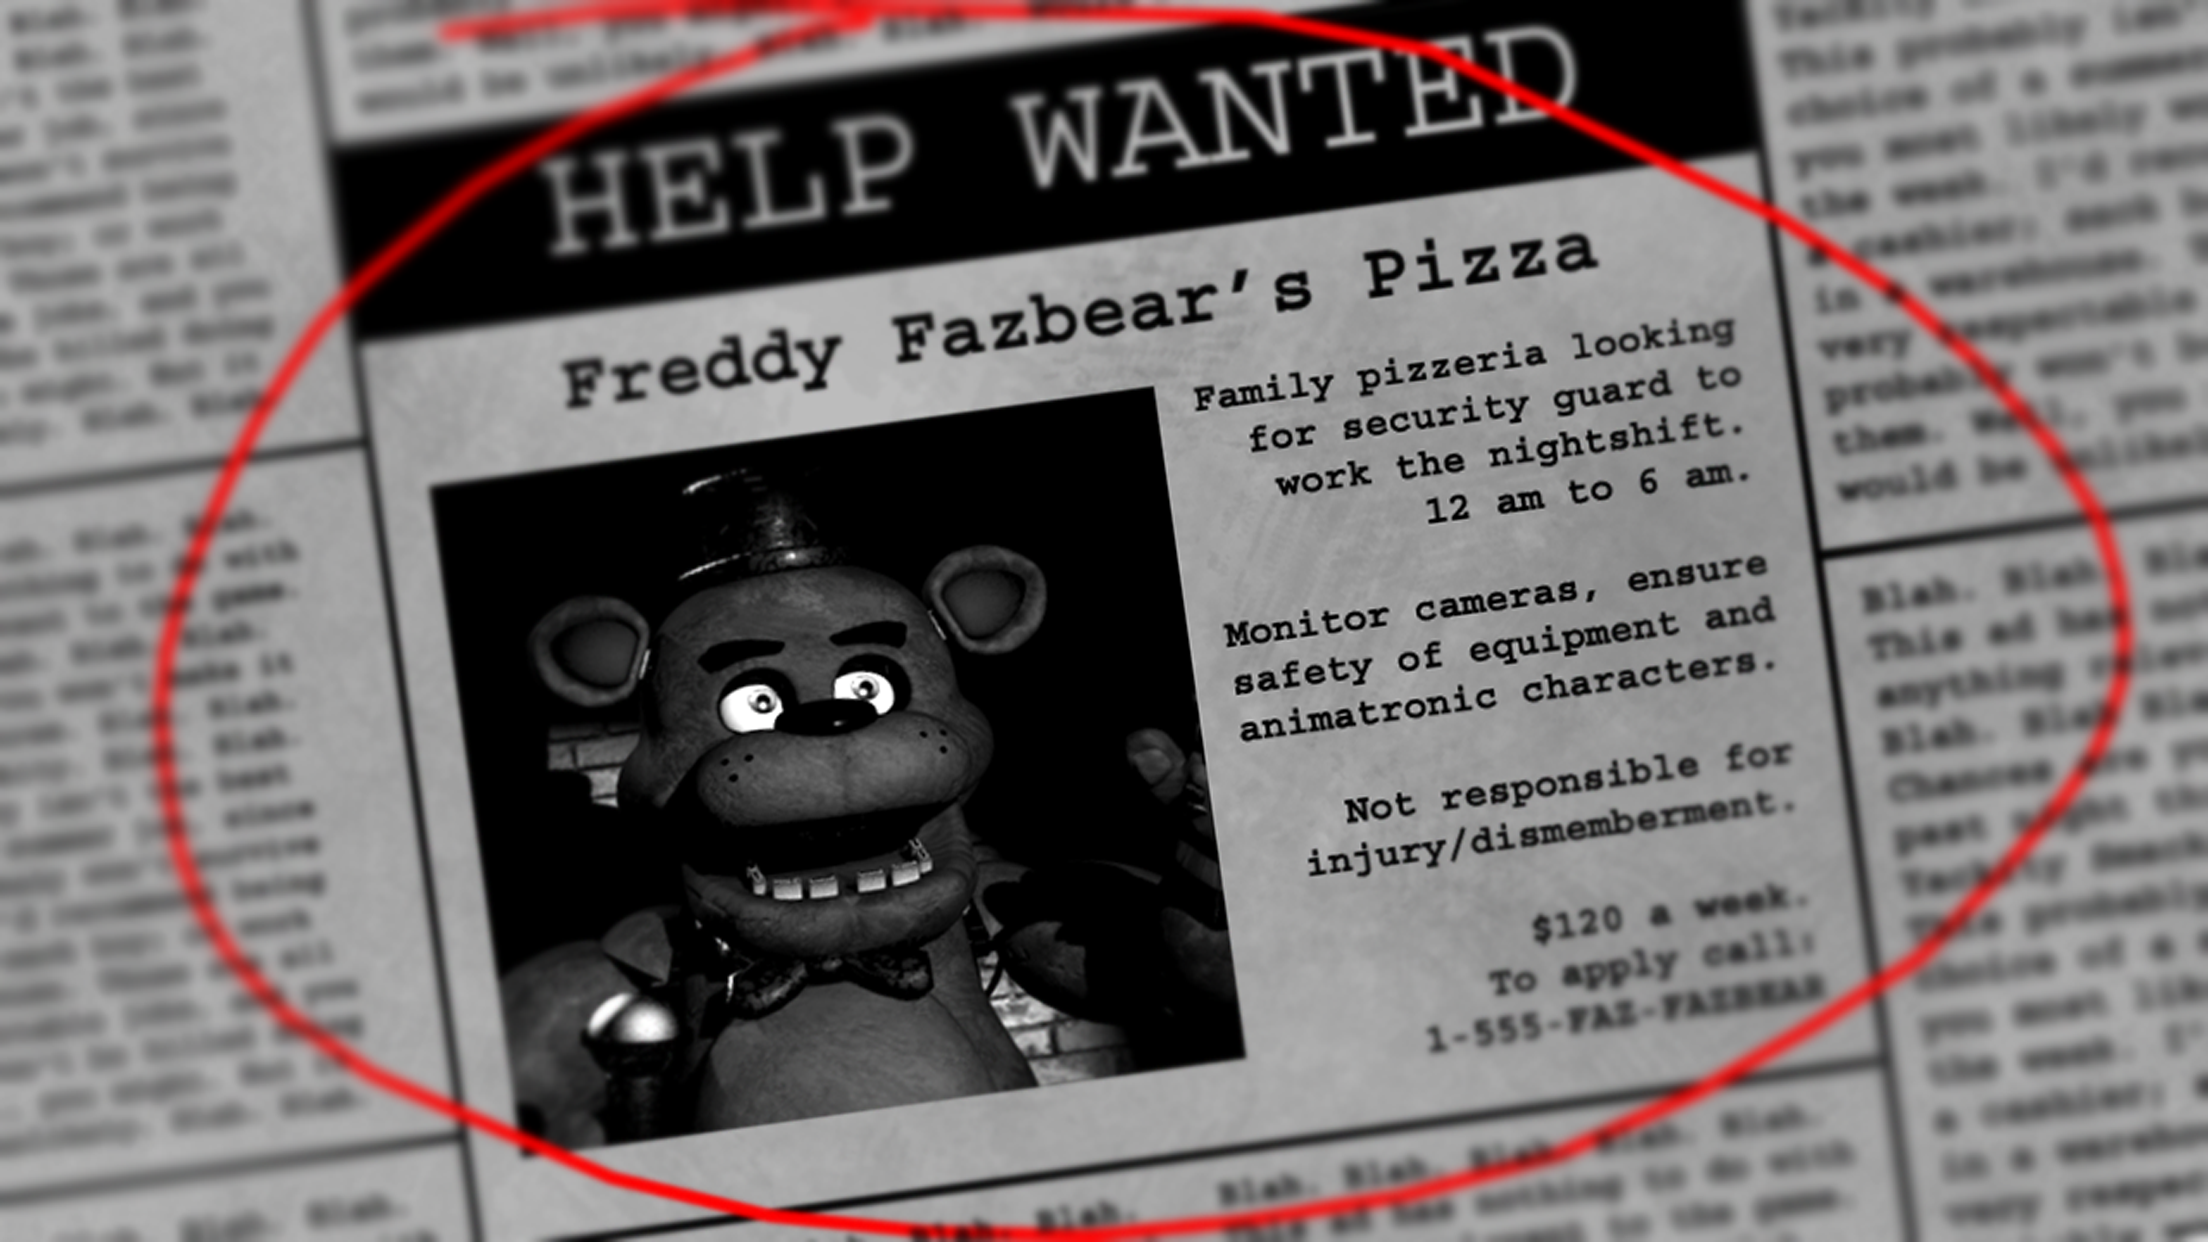 Five Nights at Freddy's 4 APK download free for android